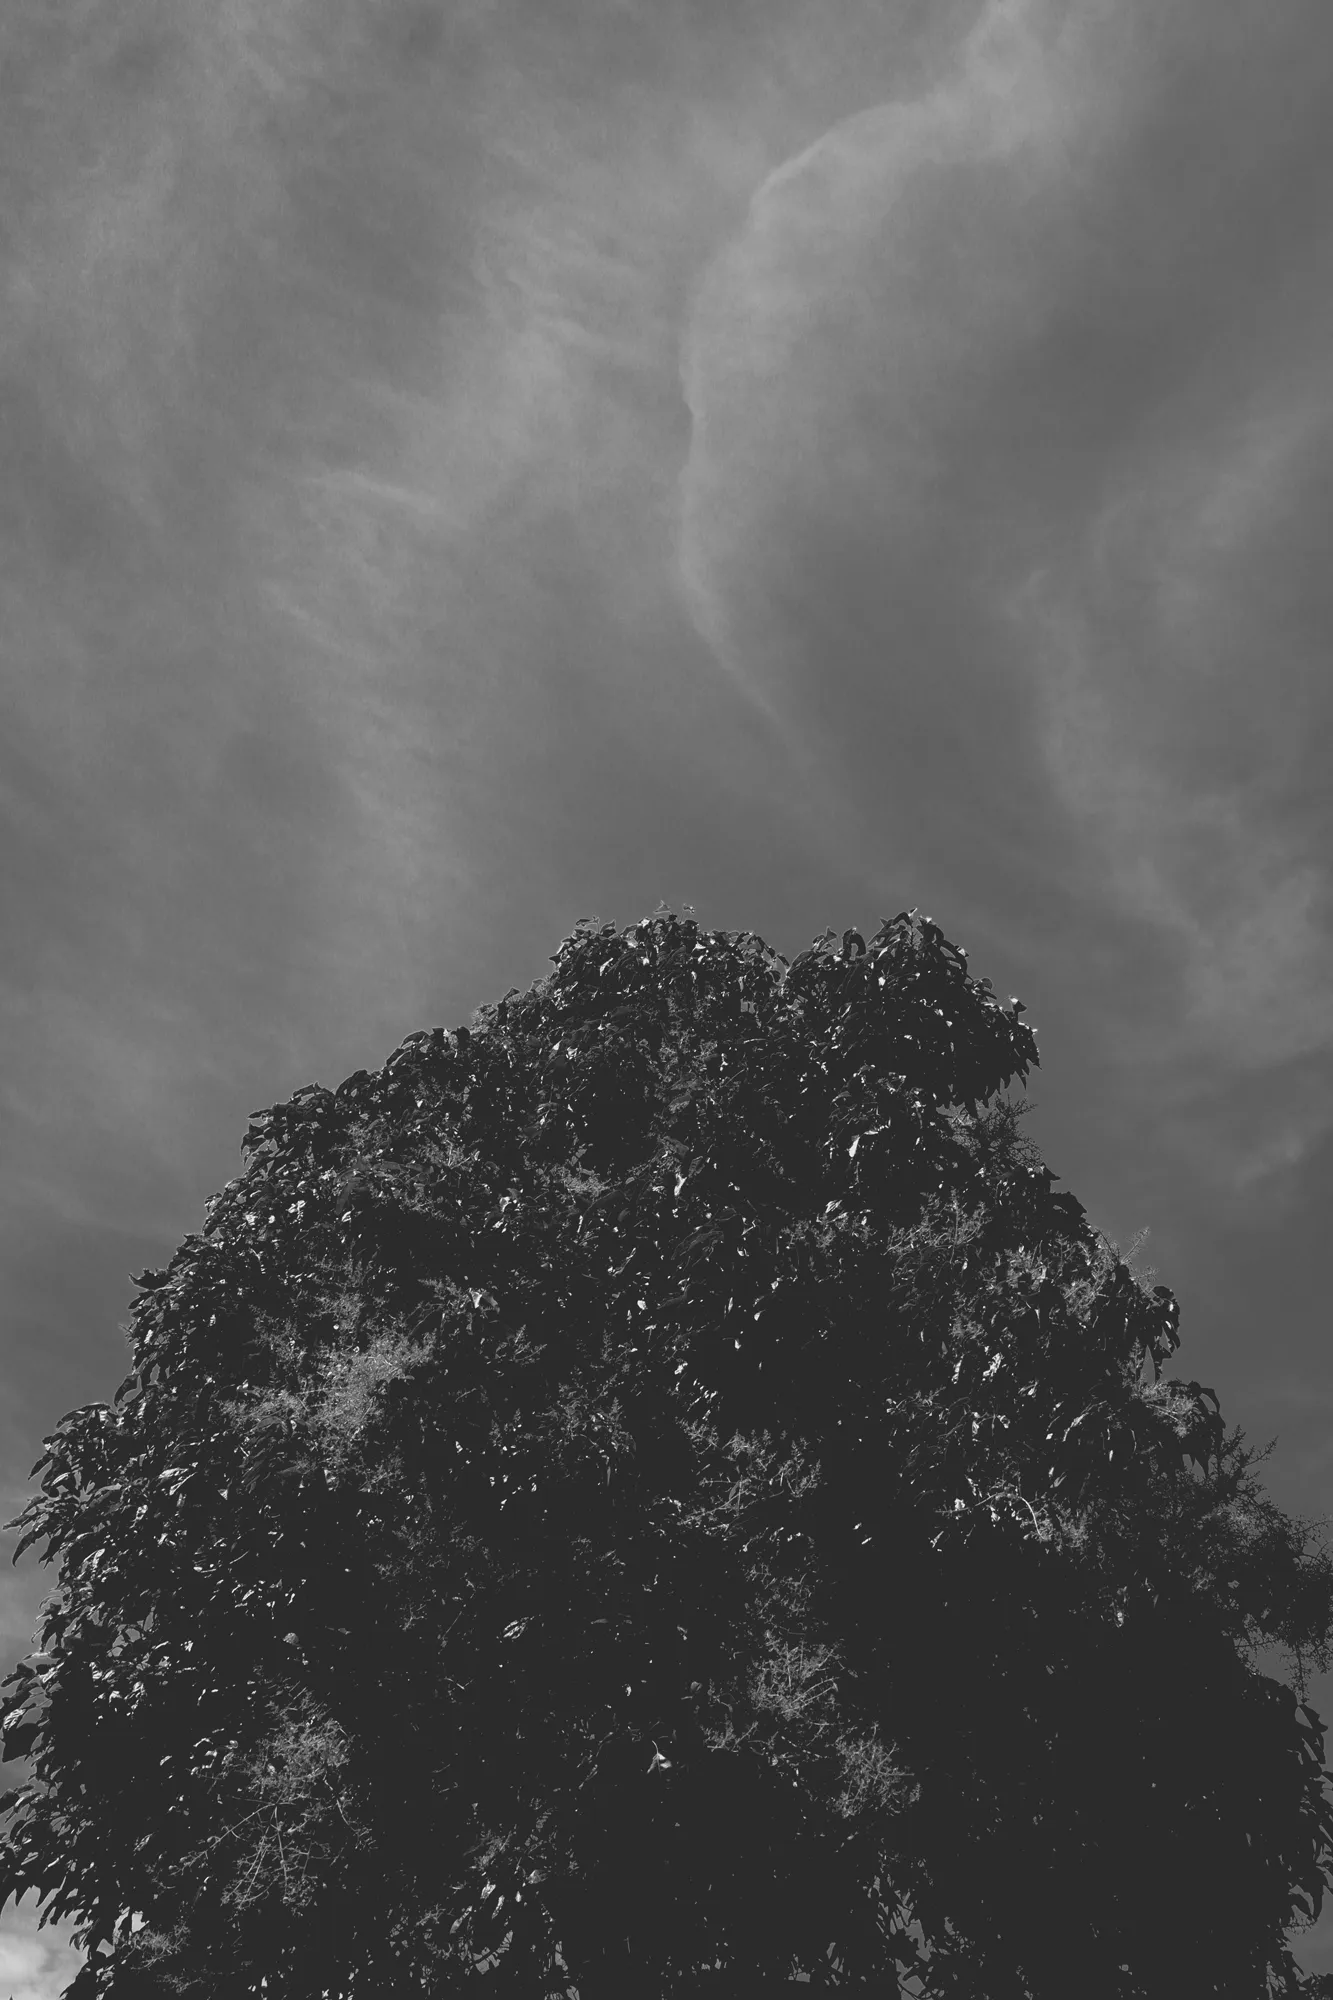 2021-11-07 - Emmerentia, Johannesburg - Tree with fading clouds